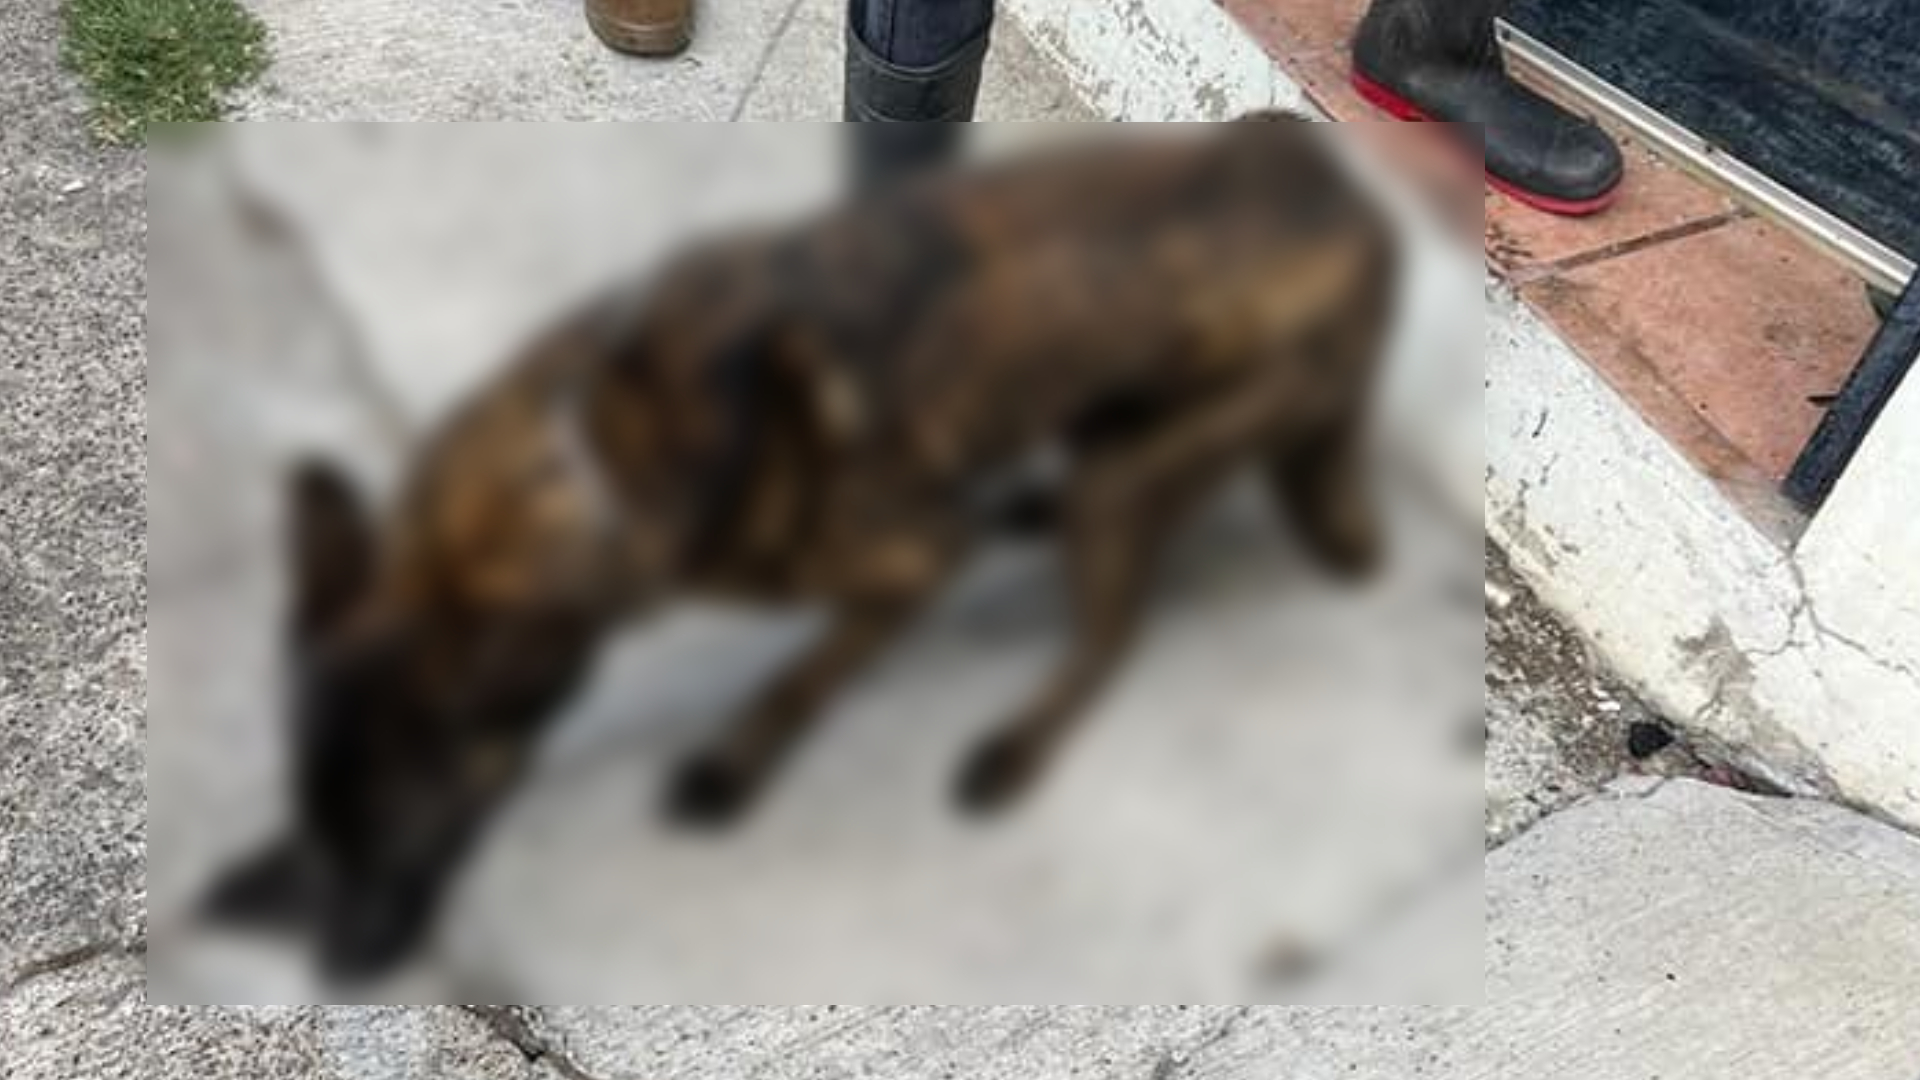 They rescue 51 mistreated dogs and cats from a house in Morelia